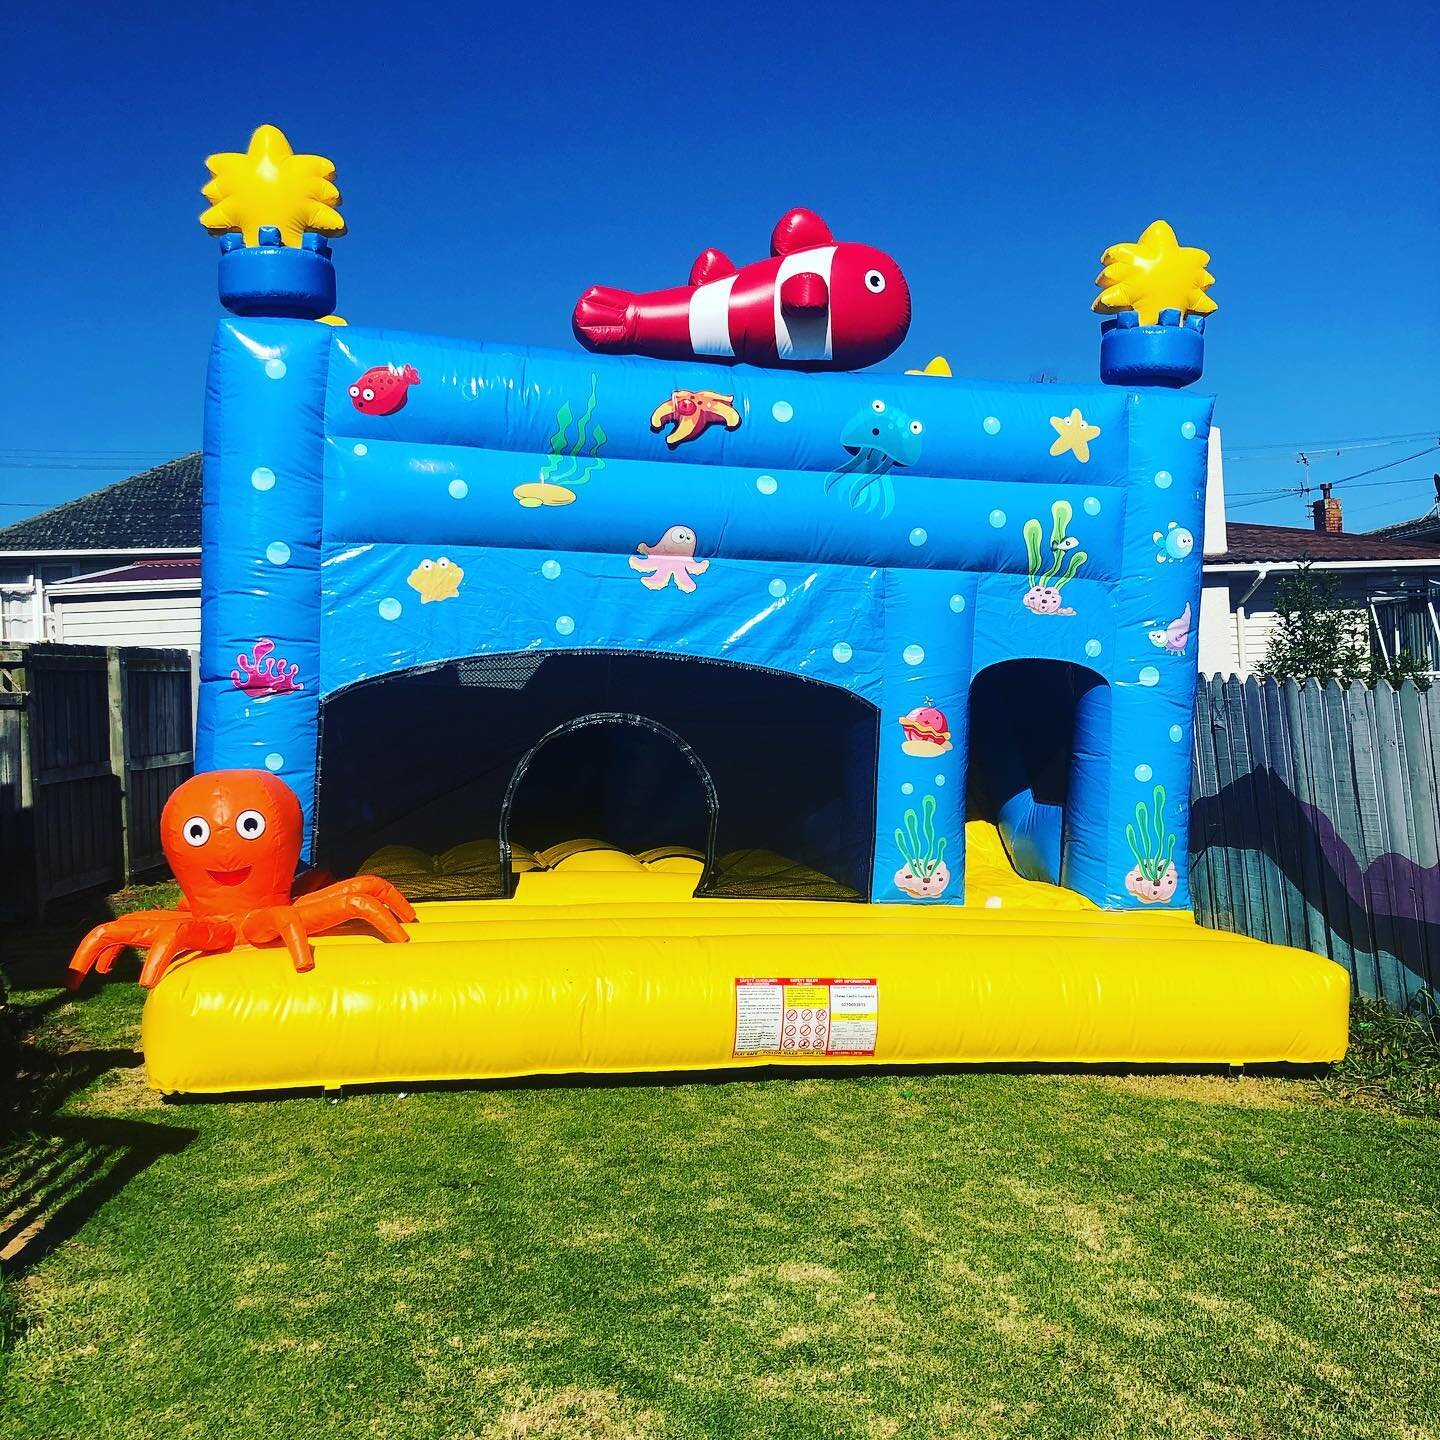 Plenty of fish in the sea and plenty of castles at Cheap Castle Company 😊

#bouncycastles